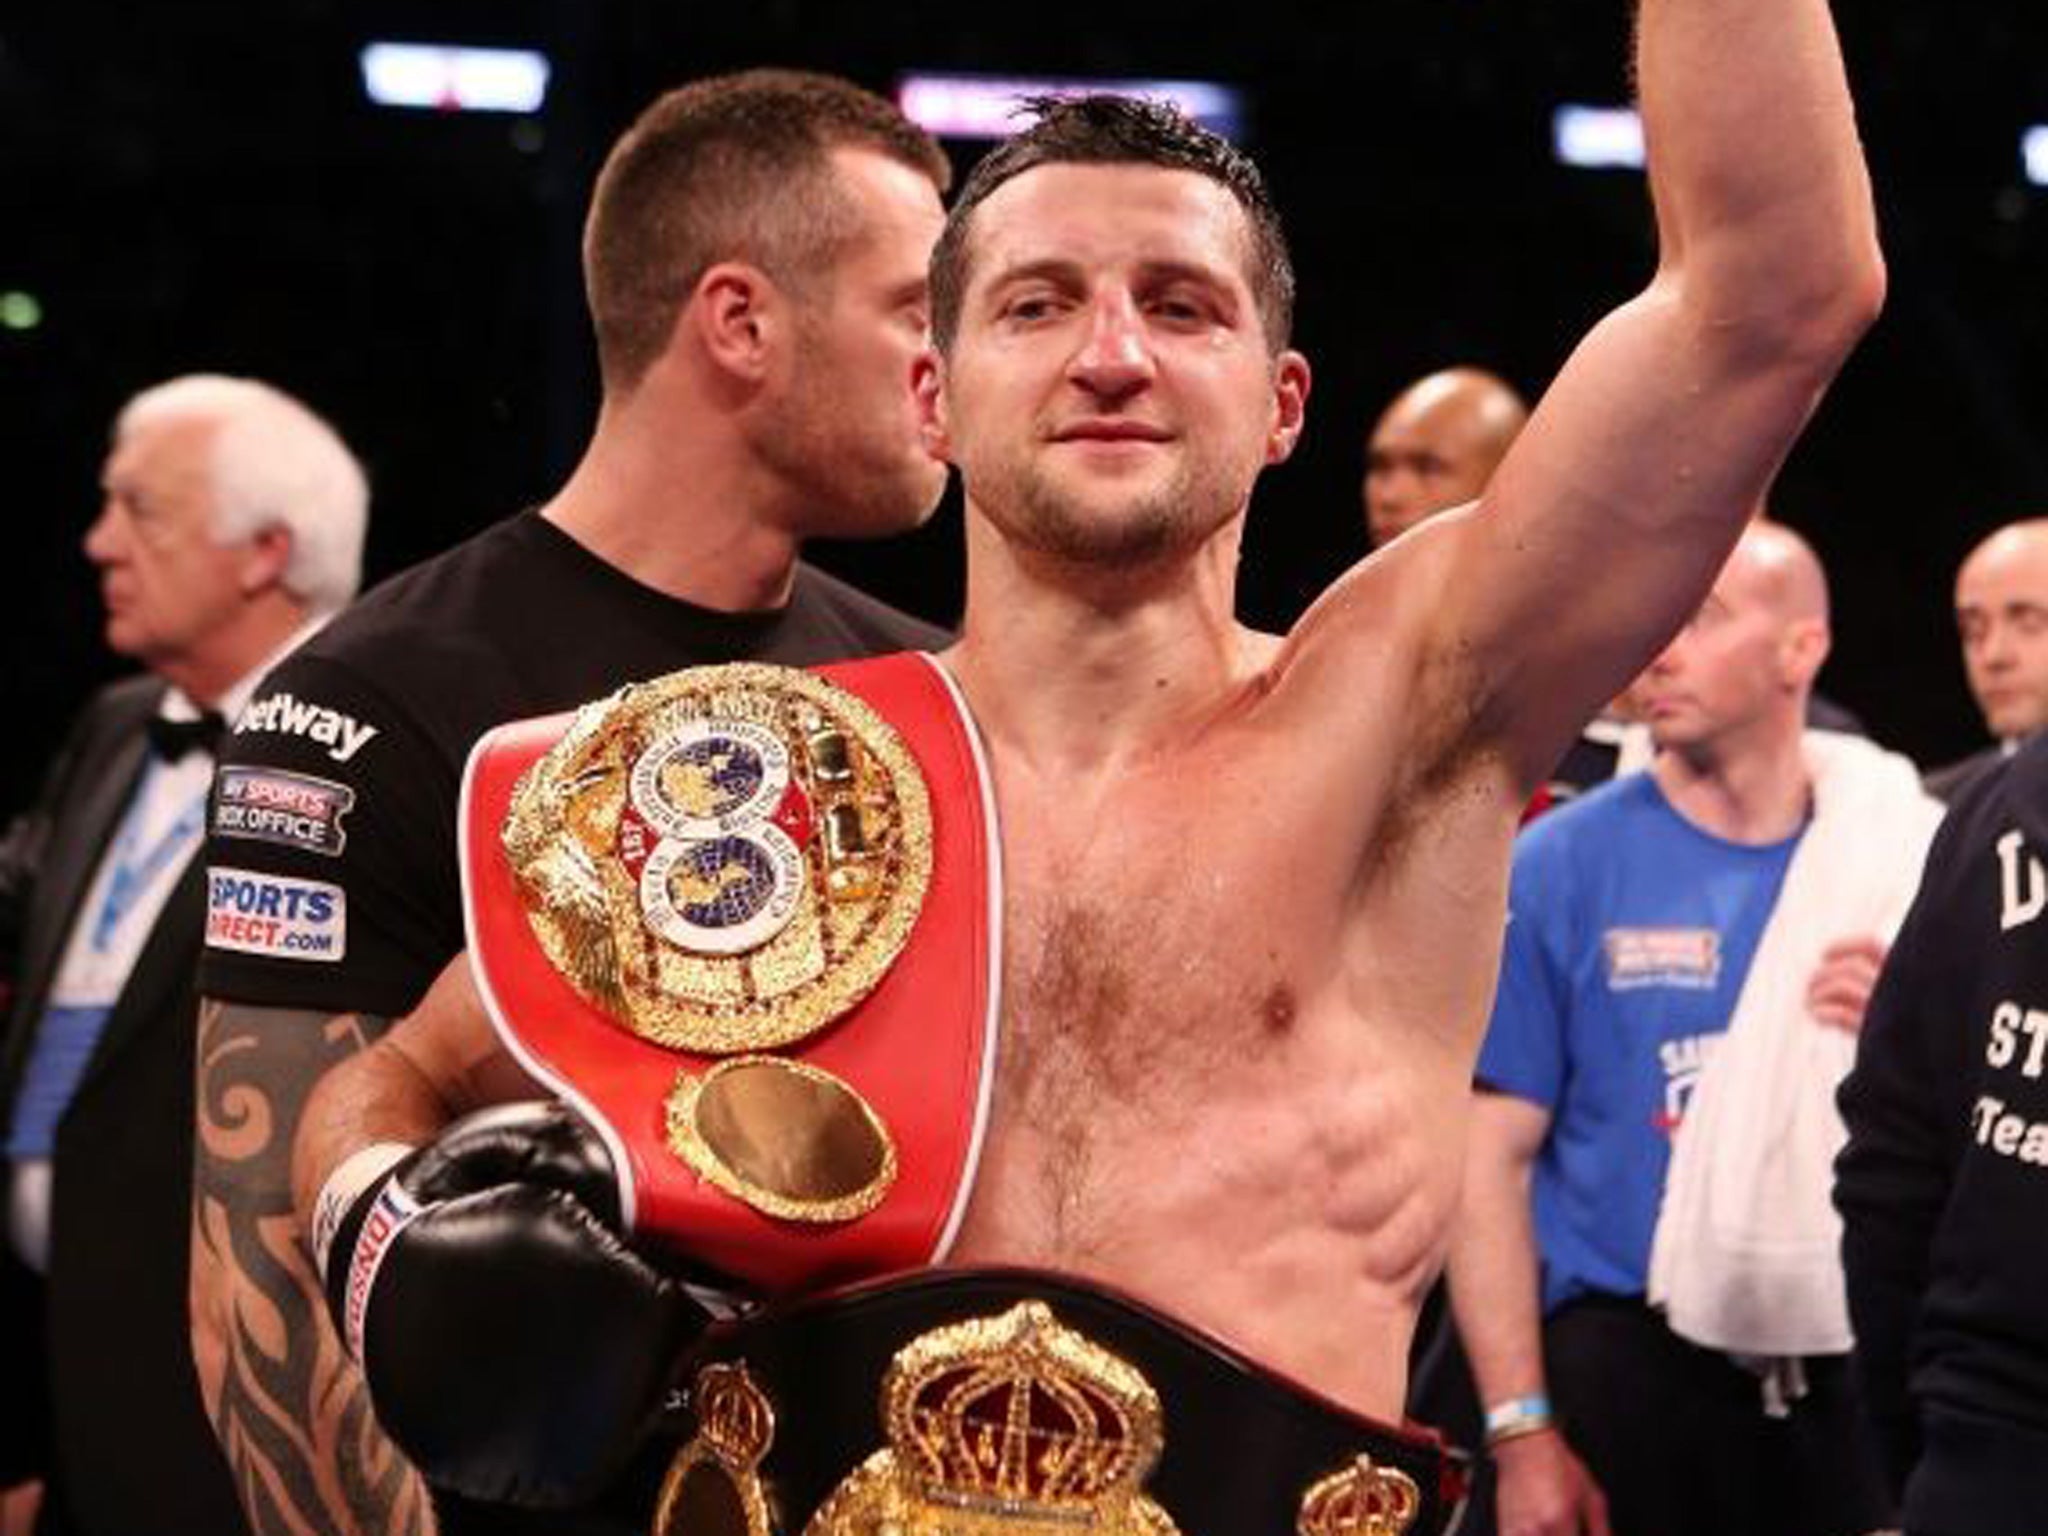 Carl Froch celebrates his win over George Groves at Wembley